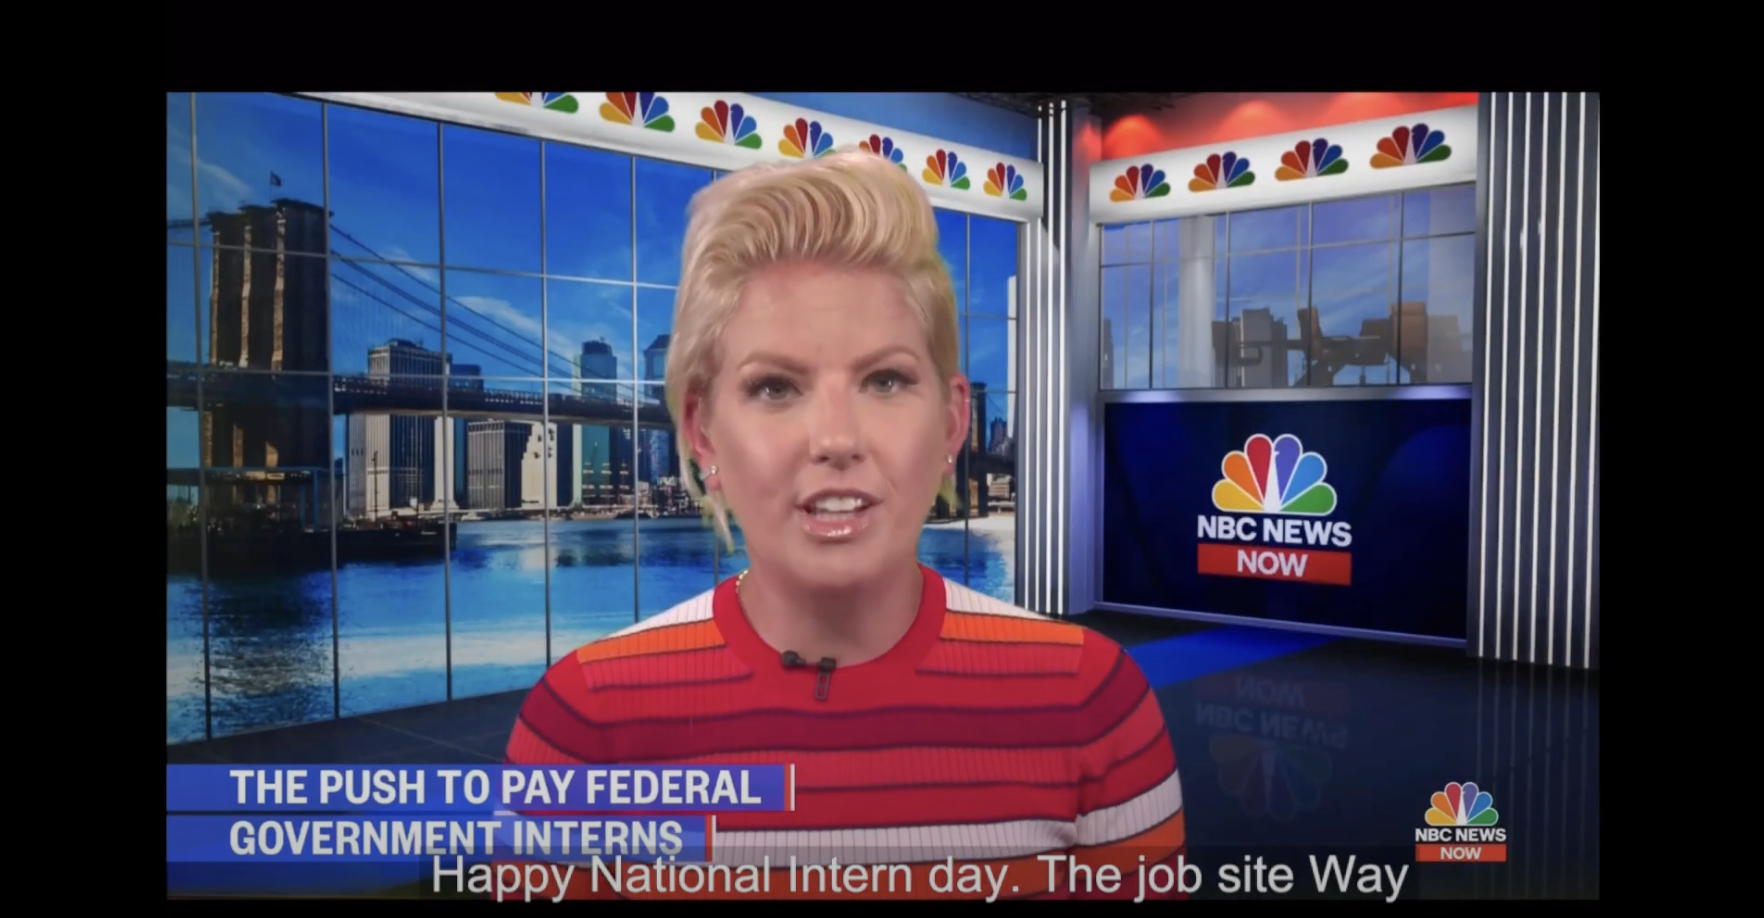 NBC News Now: Inside the push for federal government interns to get a paycheck